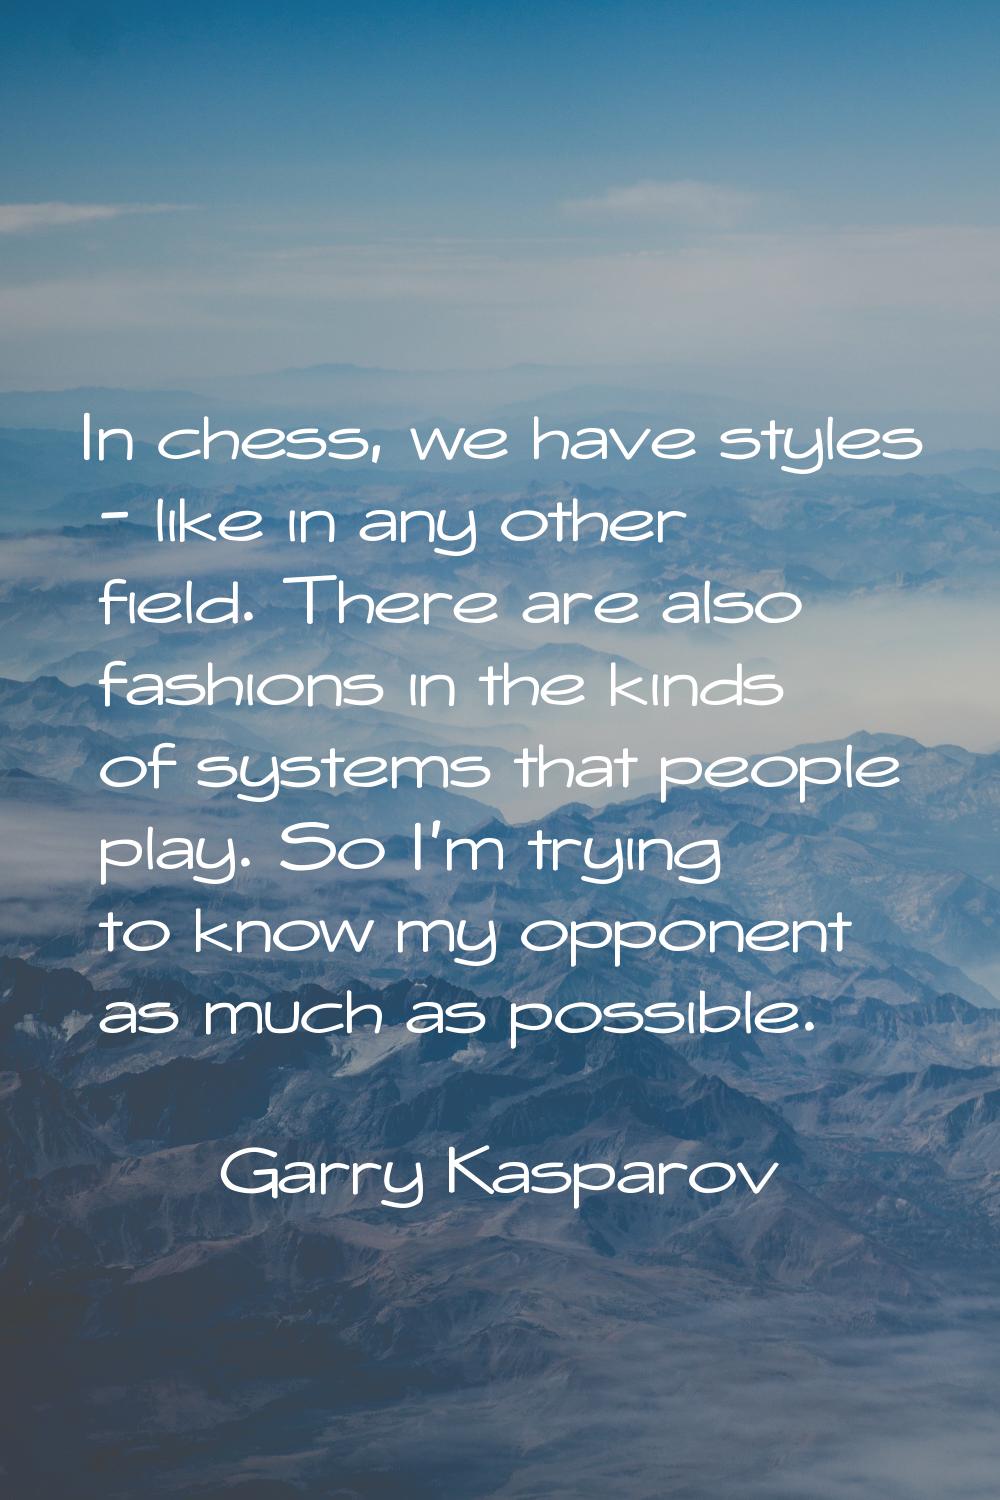 In chess, we have styles - like in any other field. There are also fashions in the kinds of systems